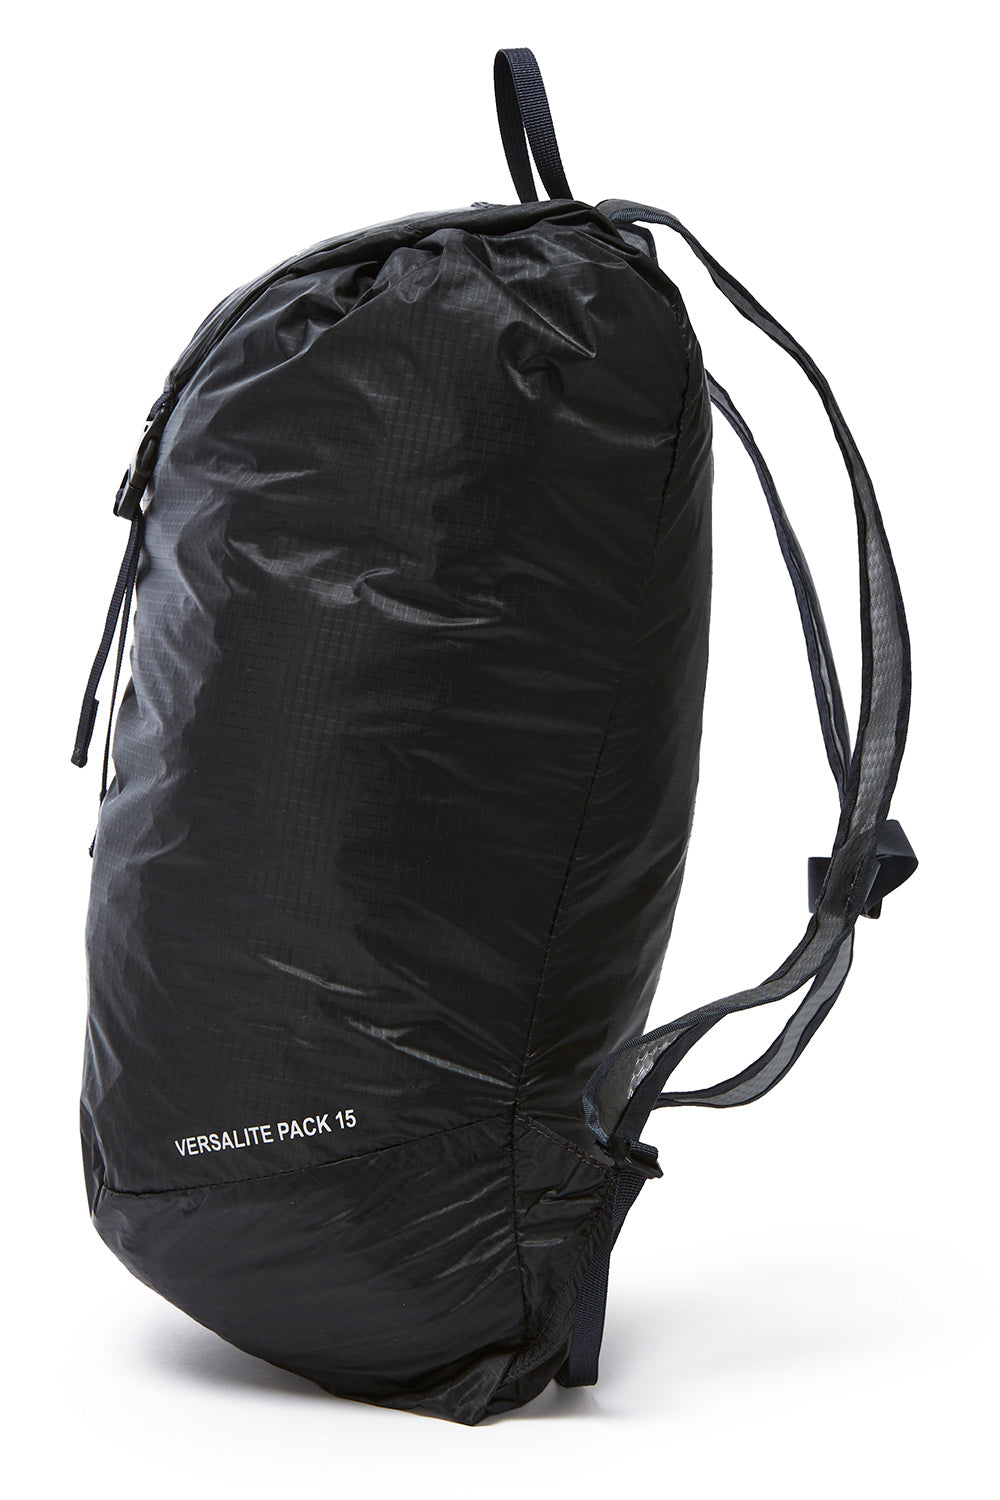 Montbell Versalite Pack 15L Backpack - Ink